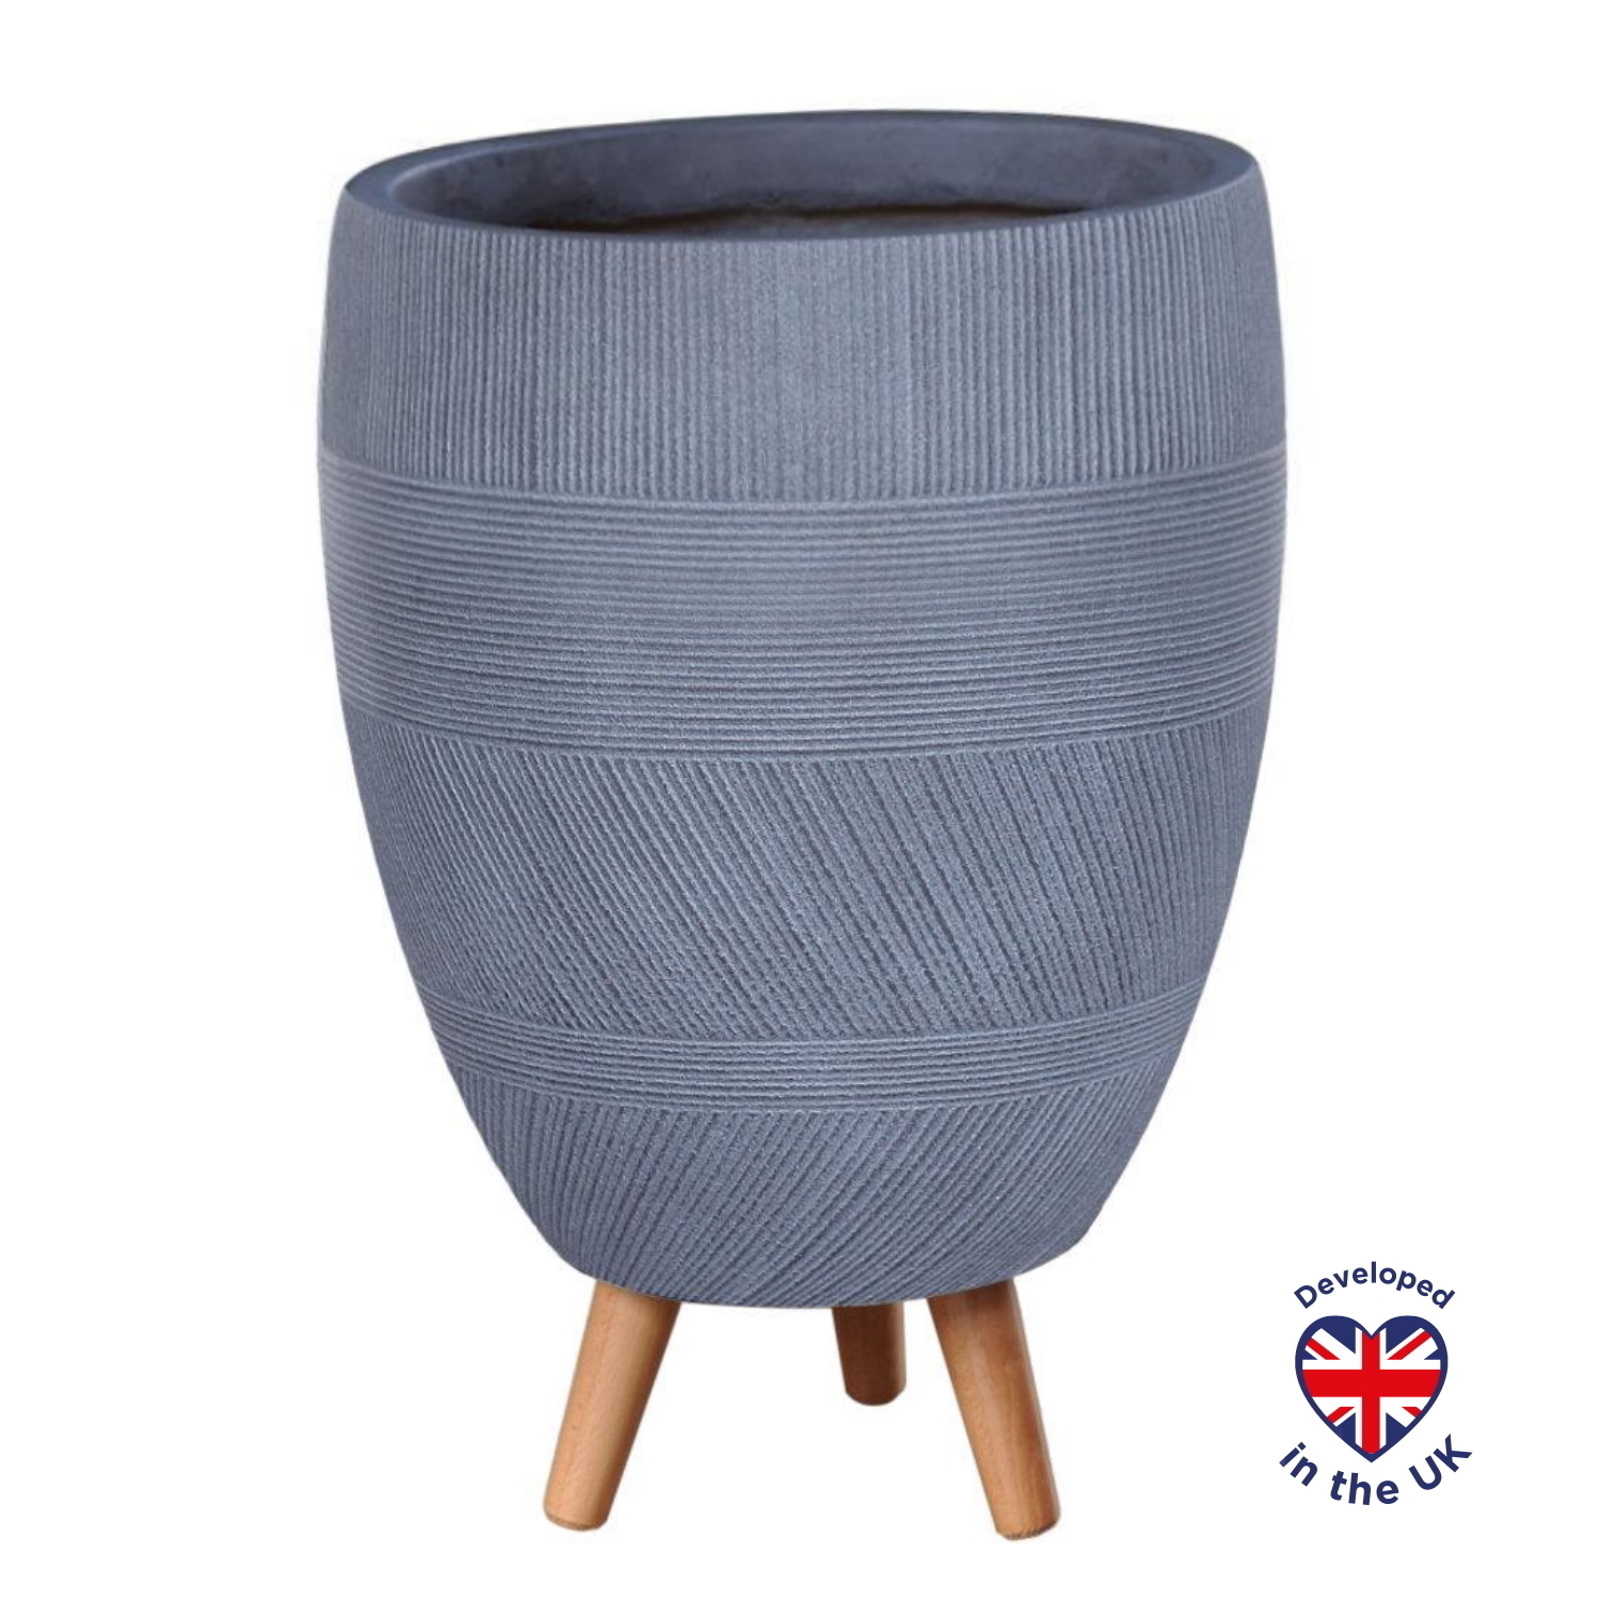 Striped Grey Indoor Egg Planter with Legs D35.5 H52 cm, 35.3 ltrs Cap.